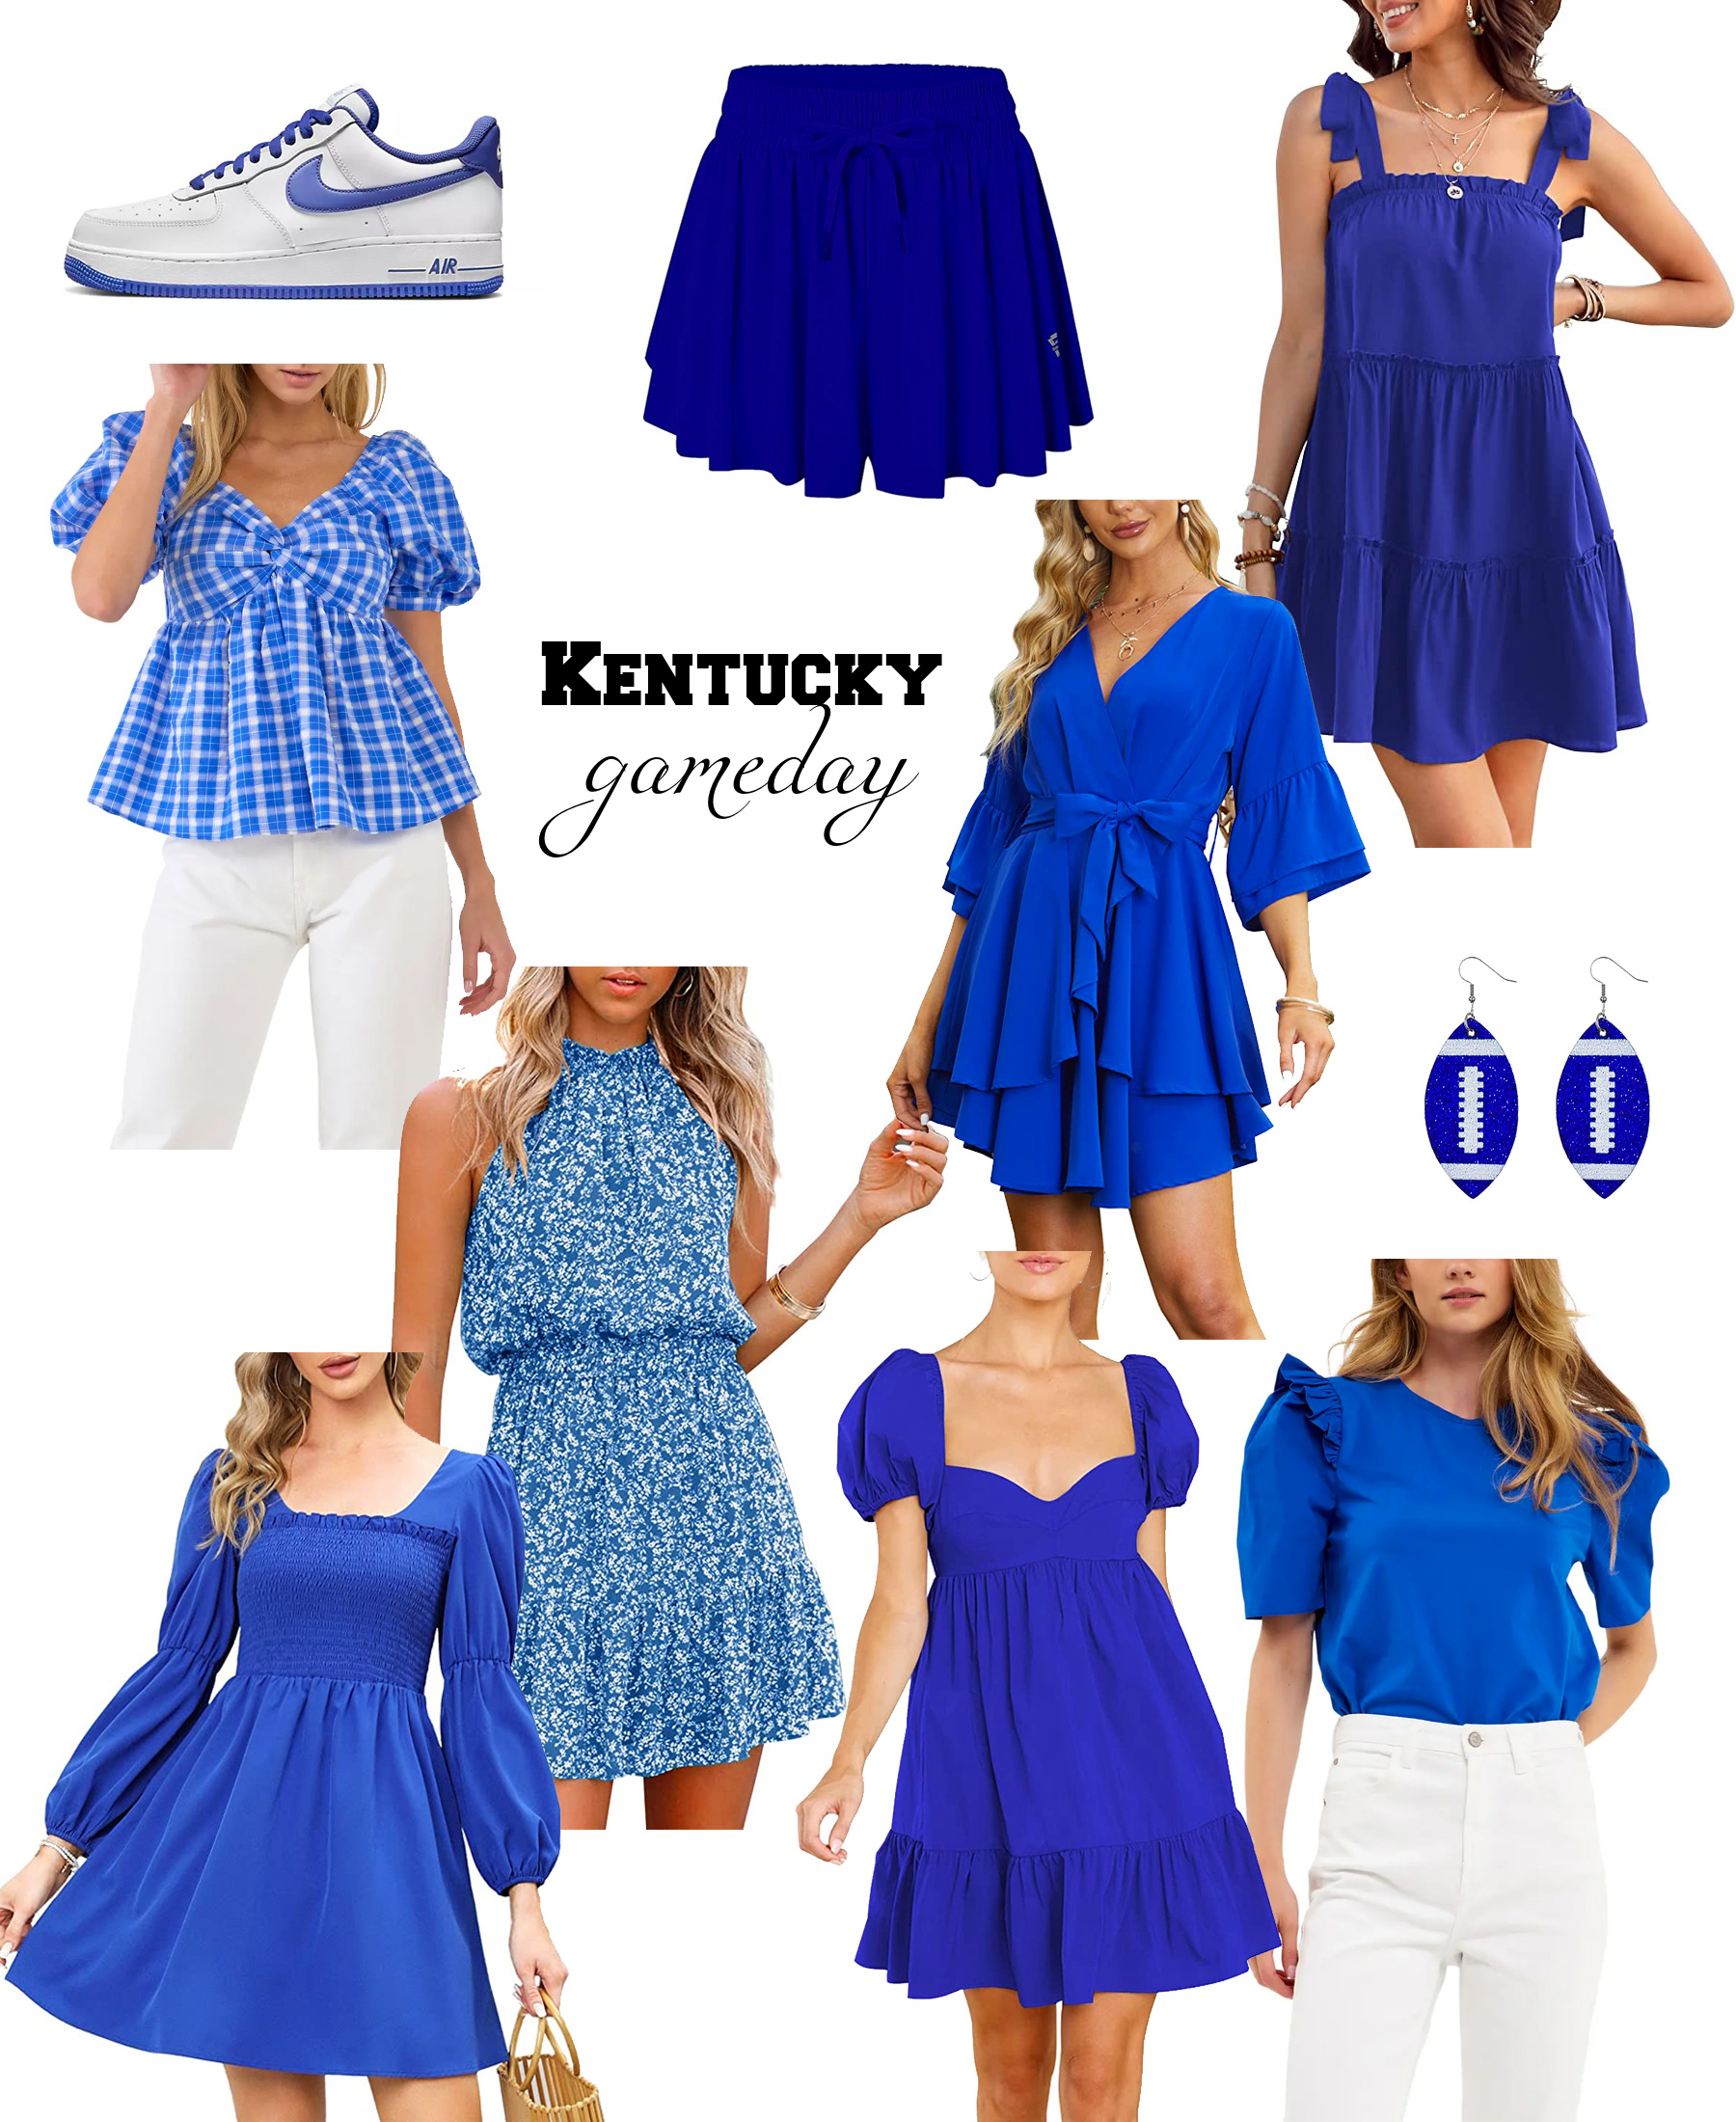 kentucky-gameday-outfits